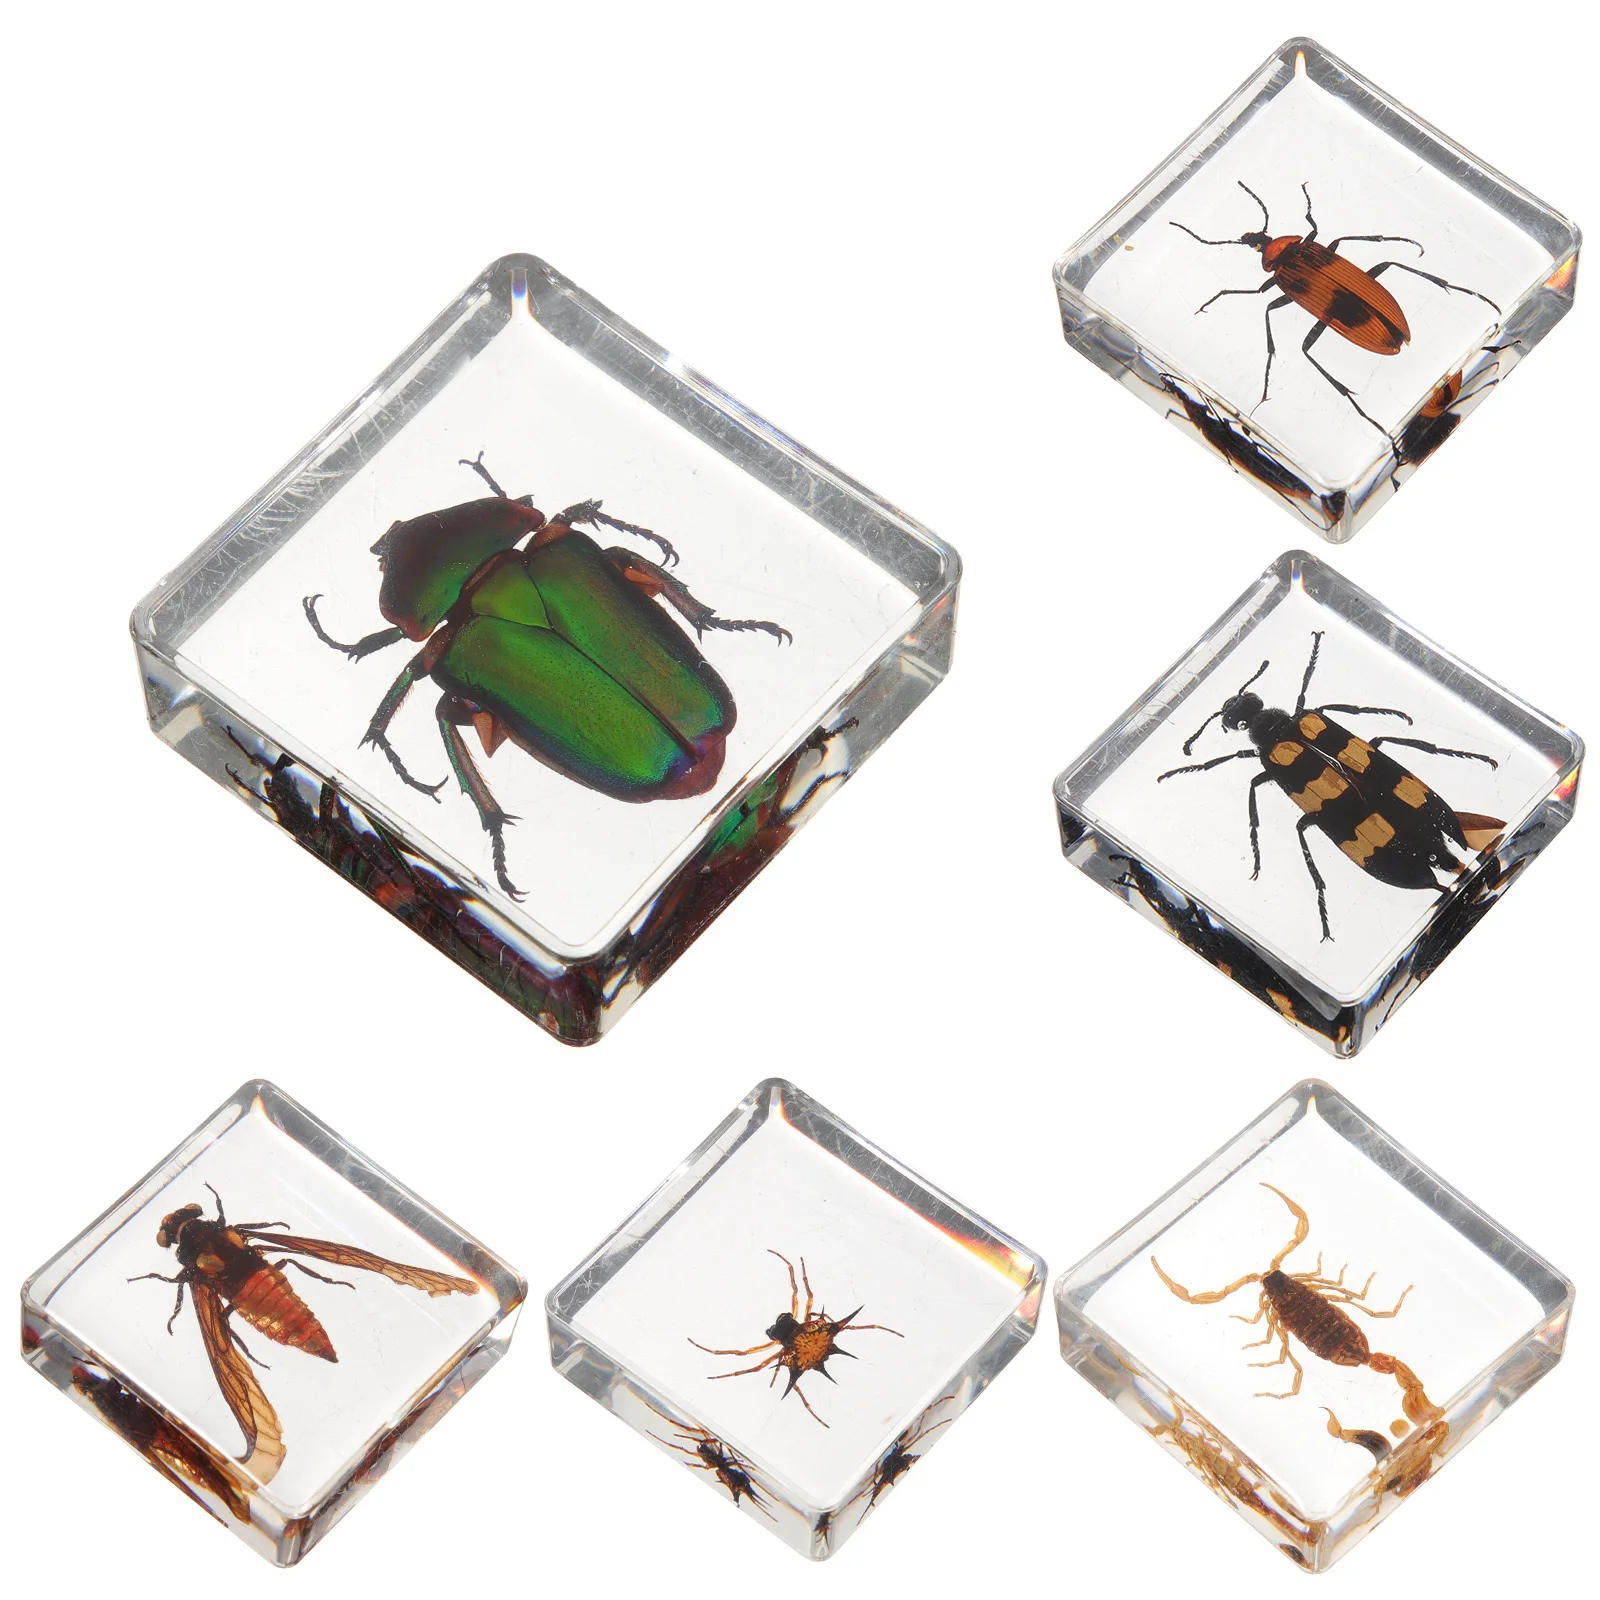 

6 Pcs Insect Specimen Decor Home Resin Adorn Dining Table Small Insects Desk Decoration Student Desktop